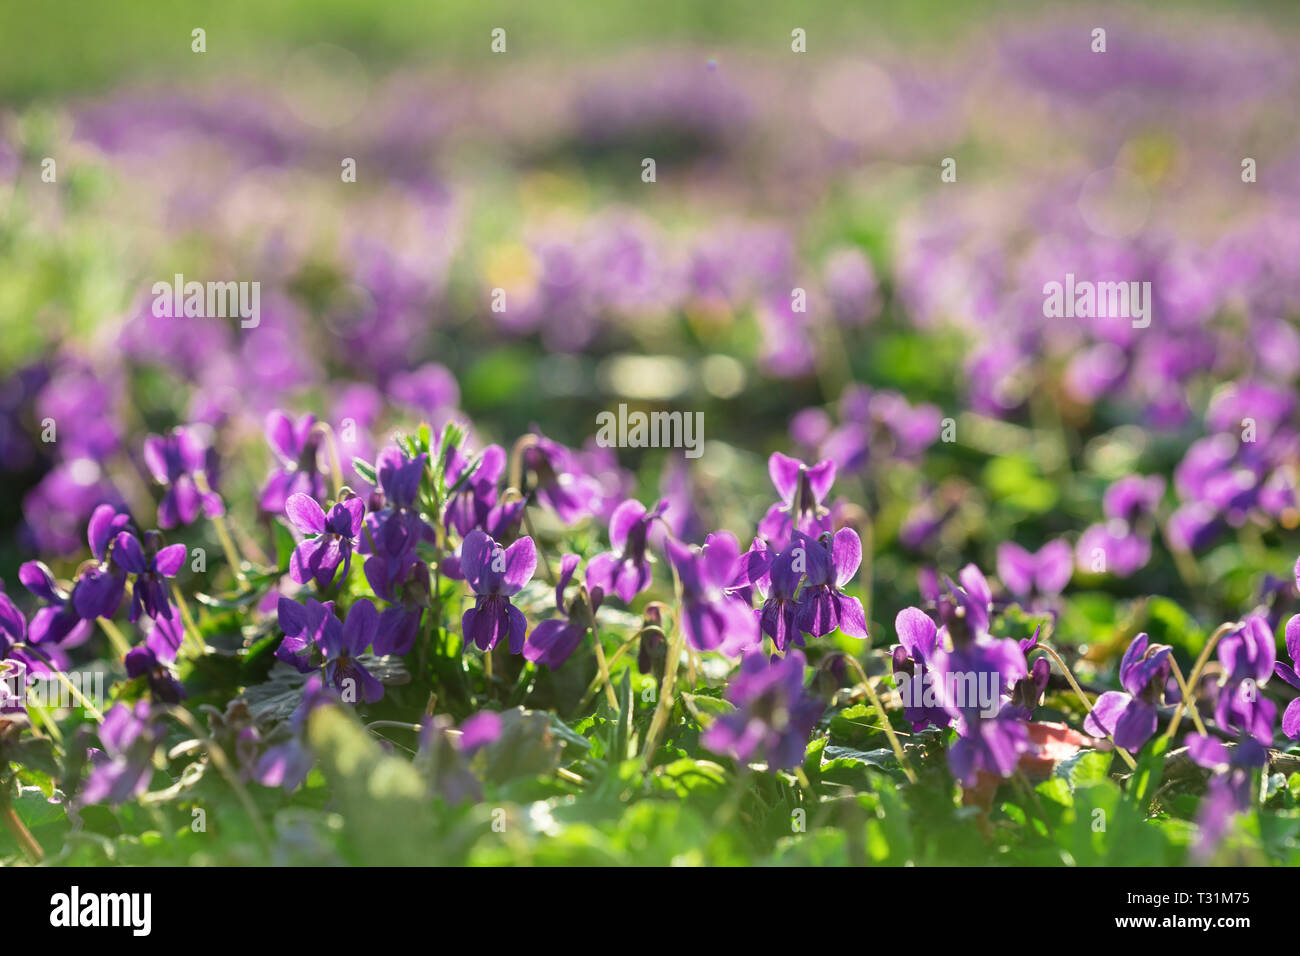 Beautiful Young and Fresh Wild Violets In the Sunny Early Spring Garden Stock Photo